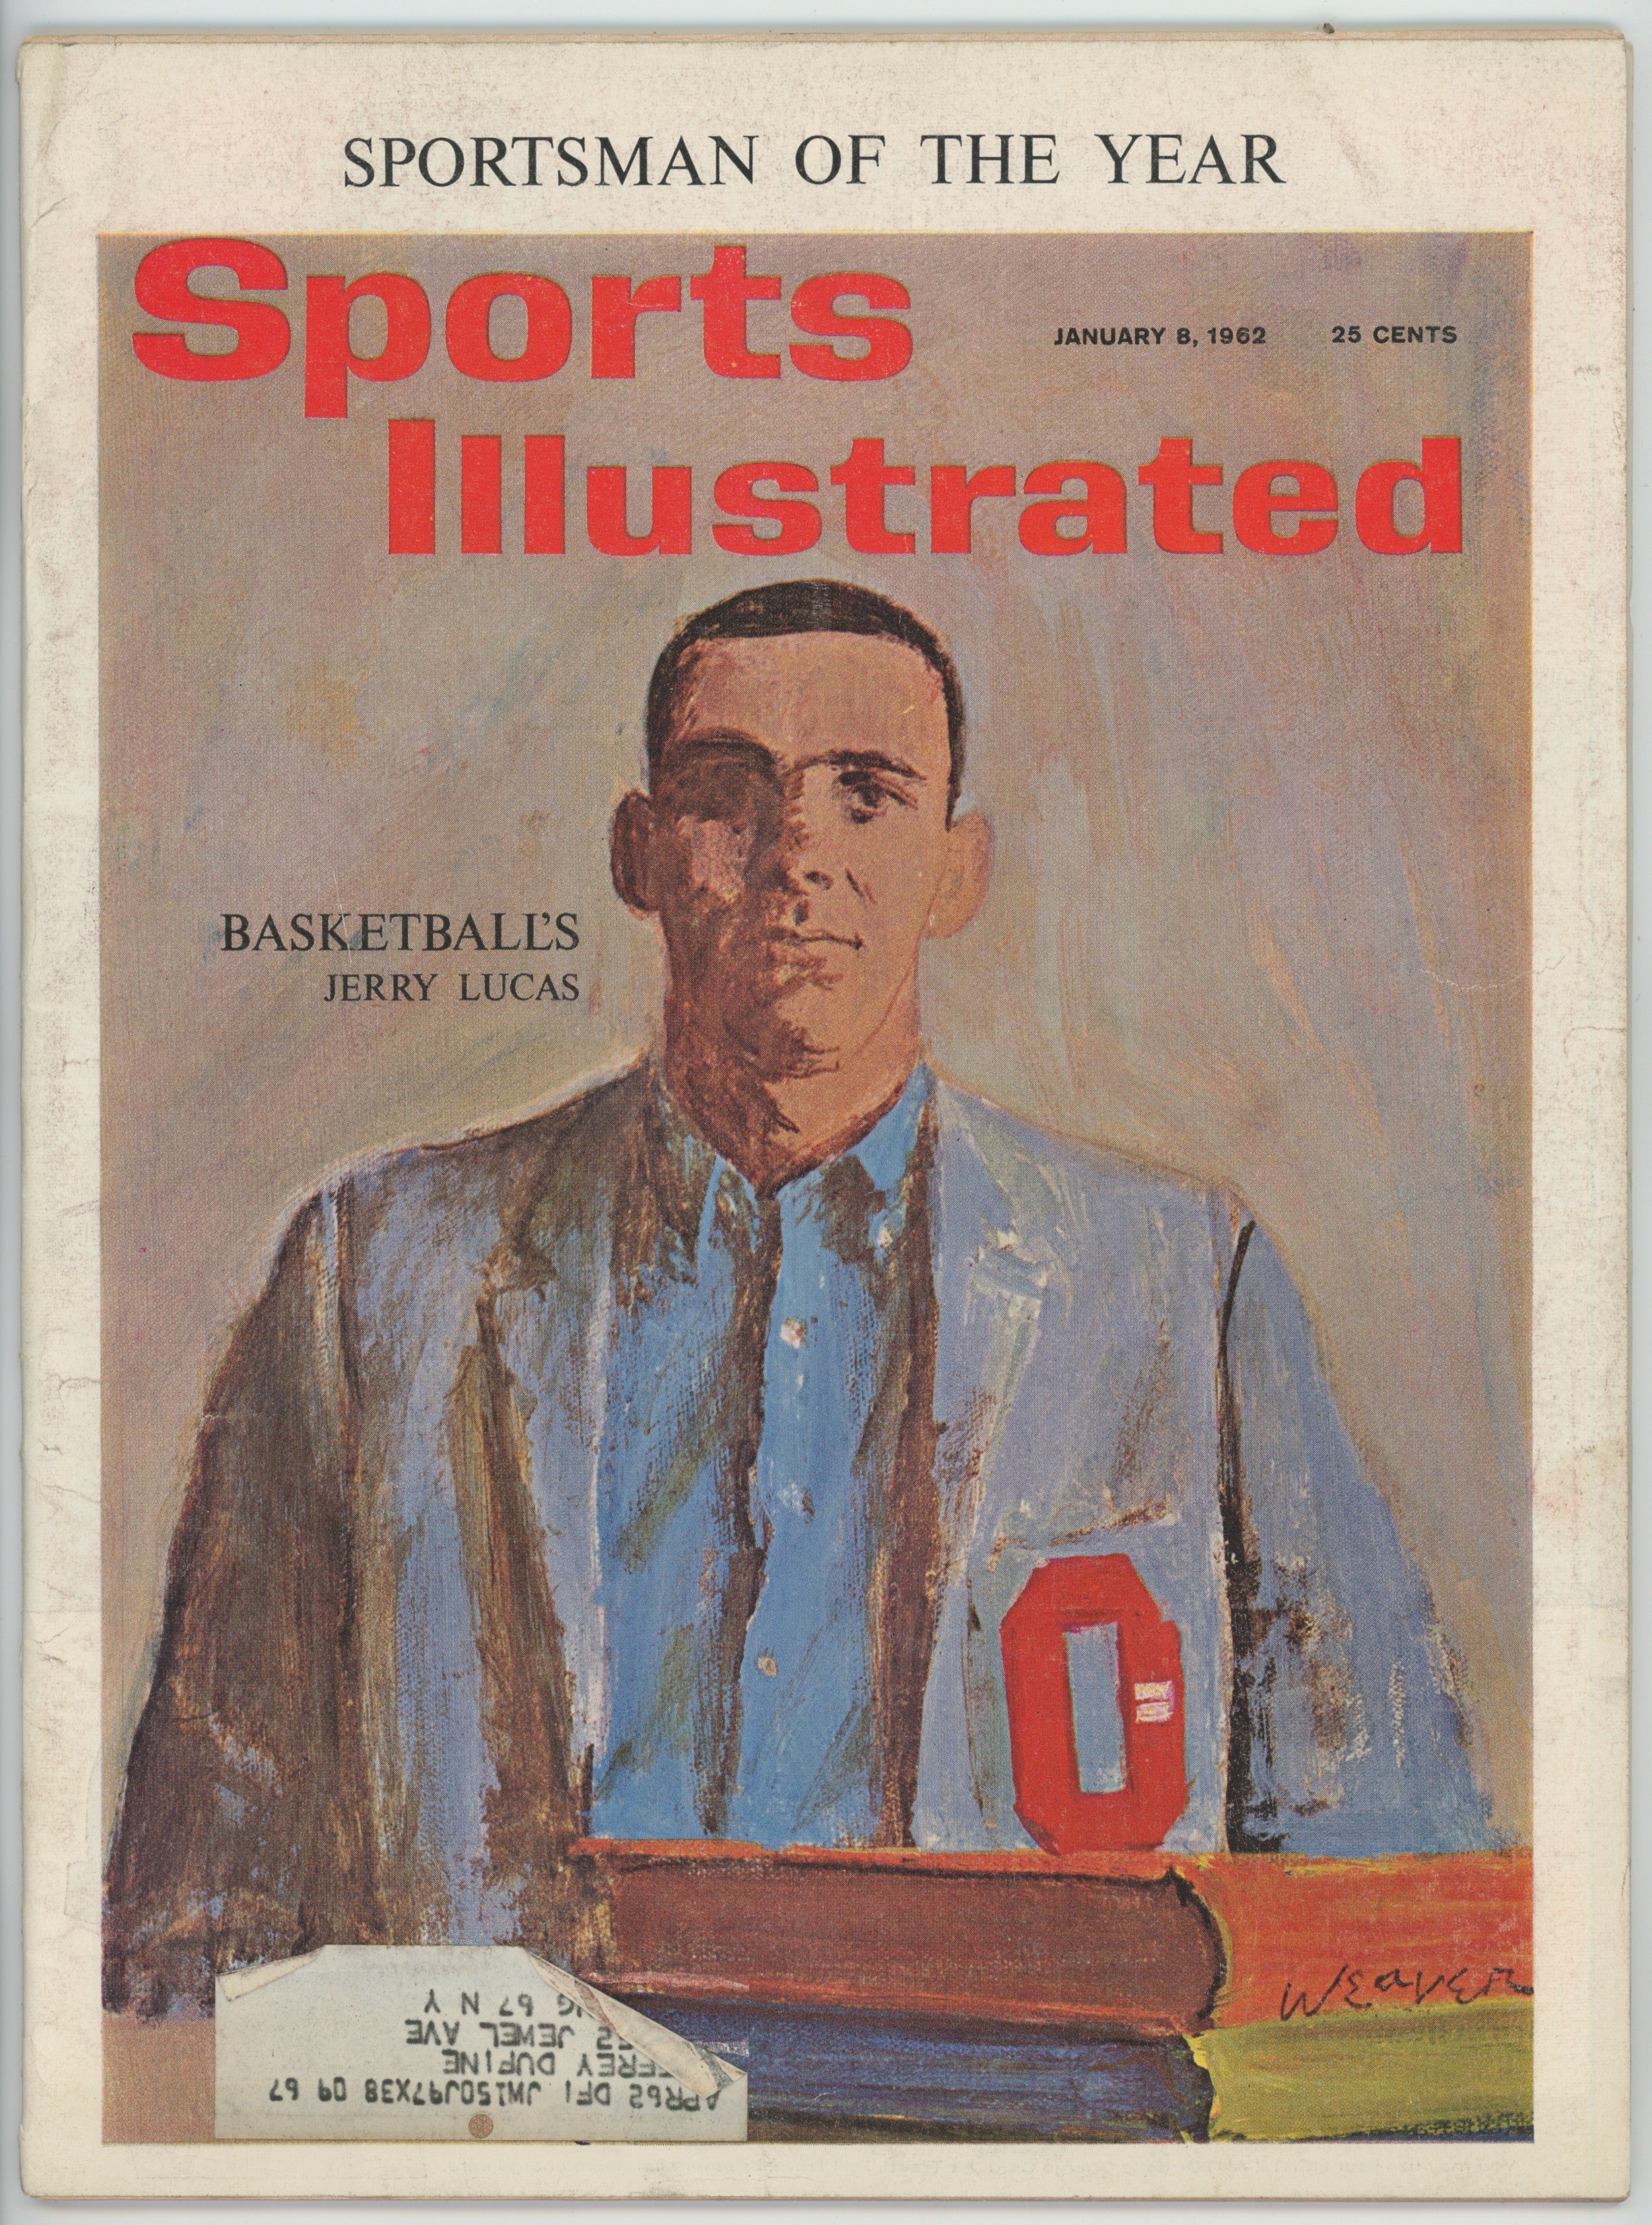 Jerry Lucas “Sportsman of the Year” 1/8/62 EX ML